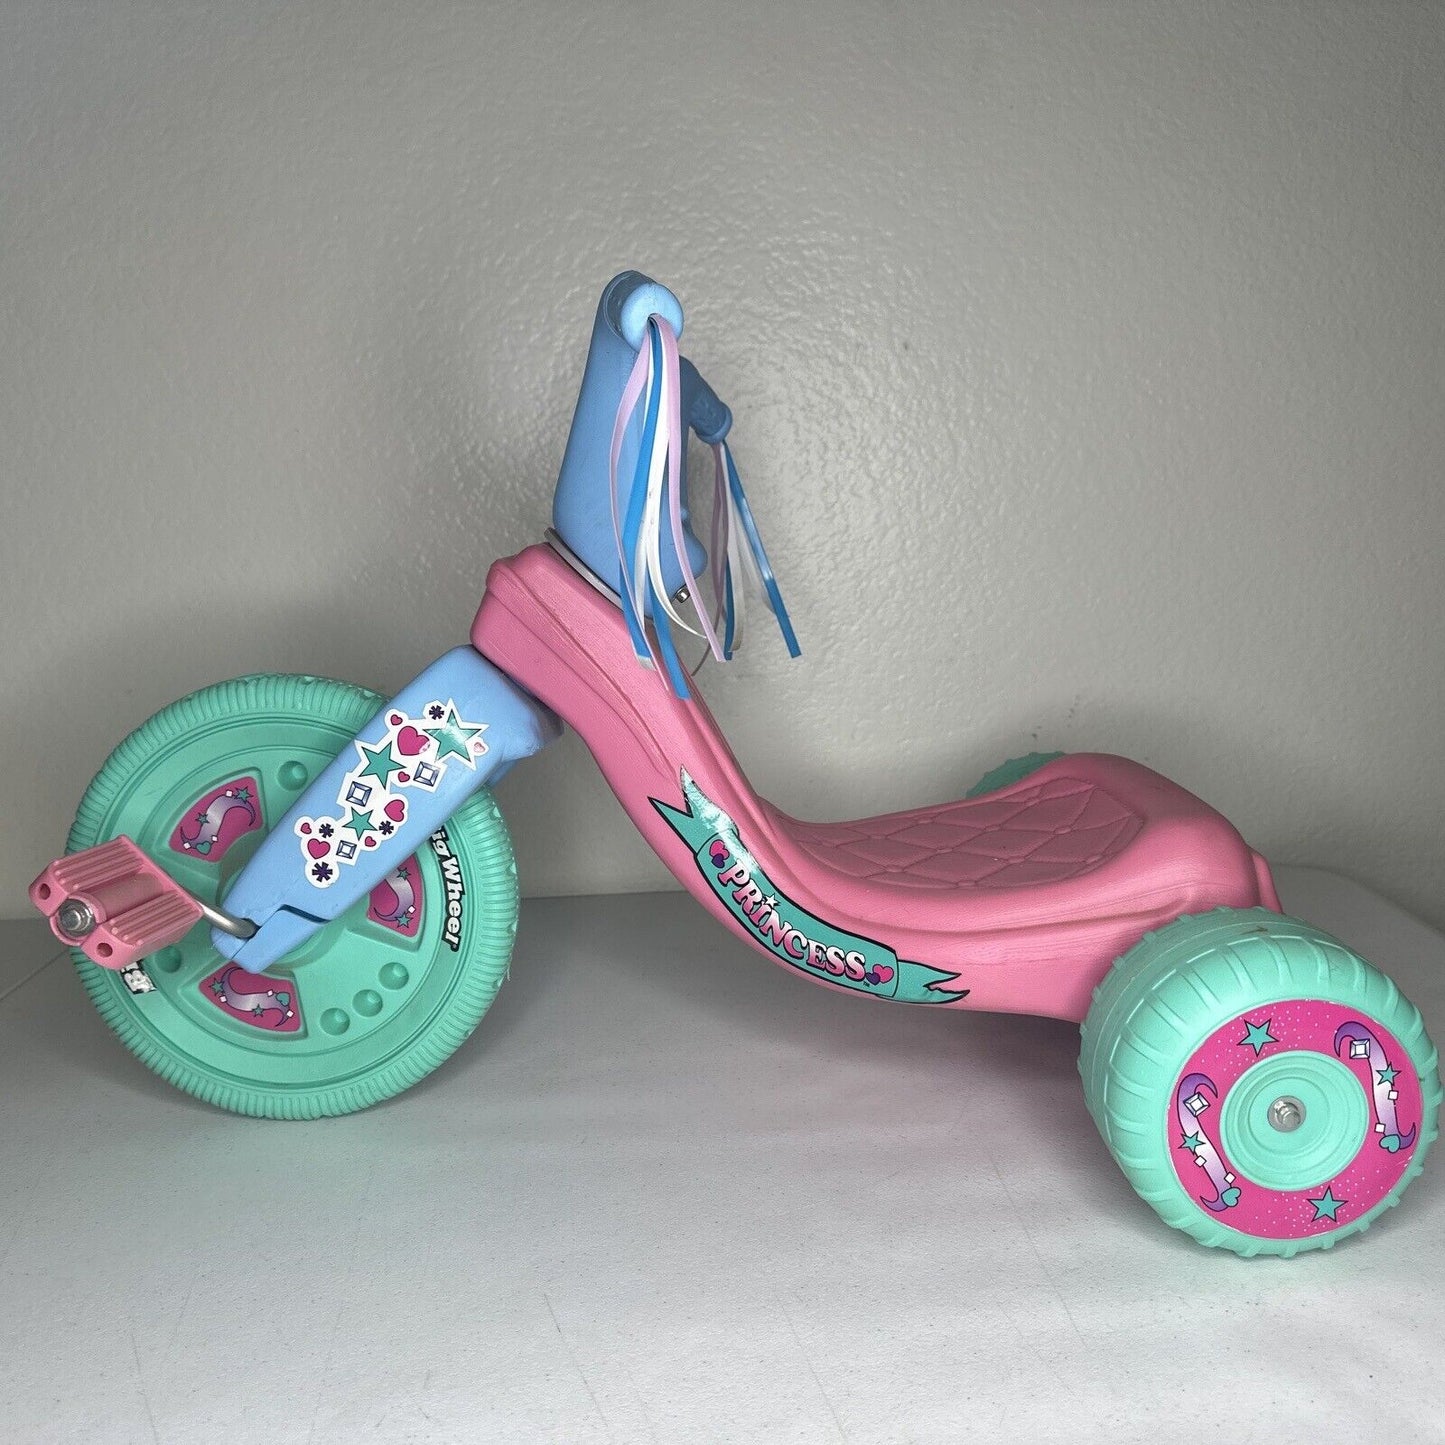 Rare 1975 Princess Edition Big Wheel 16" Tricycle - Retro Kids Toy in Pink and Blue - TreasuTiques